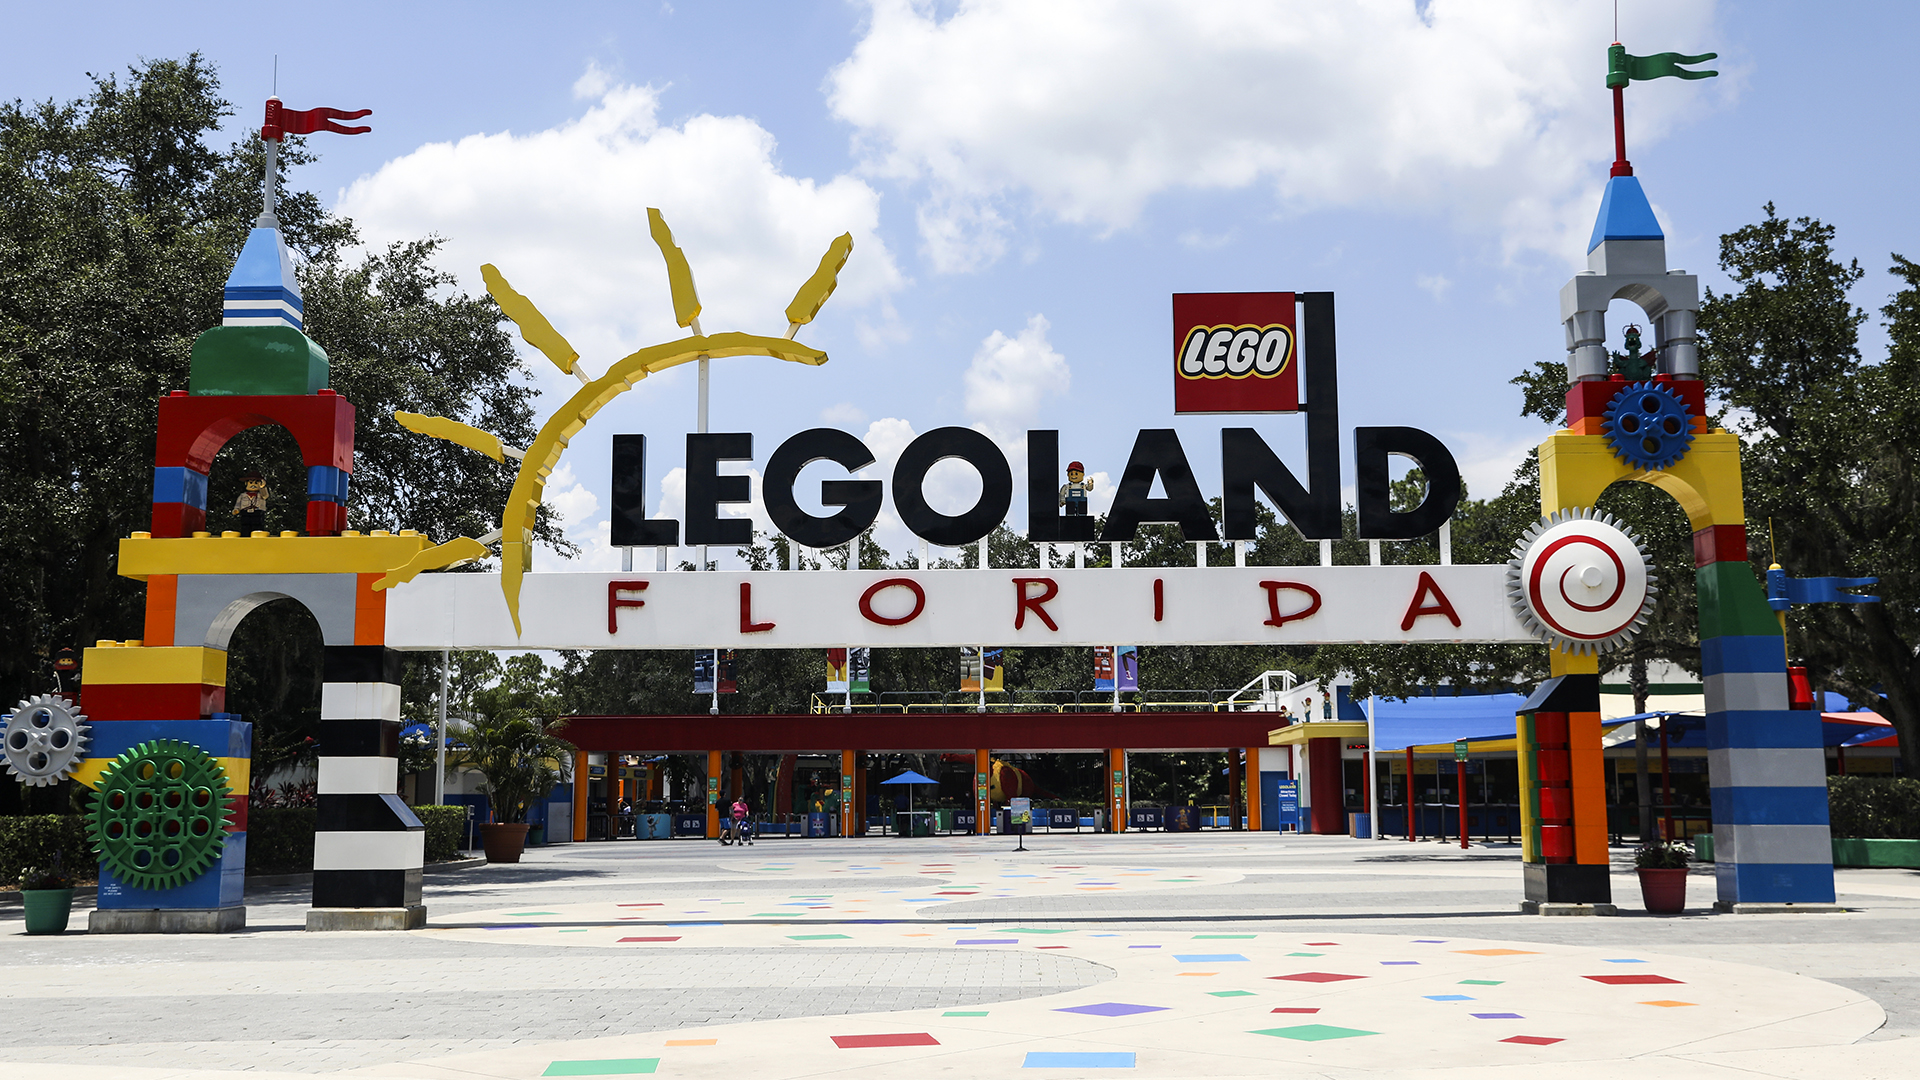 Discover the $371,000 inspiration behind Legoland Florida’s exciting new attraction opening this year